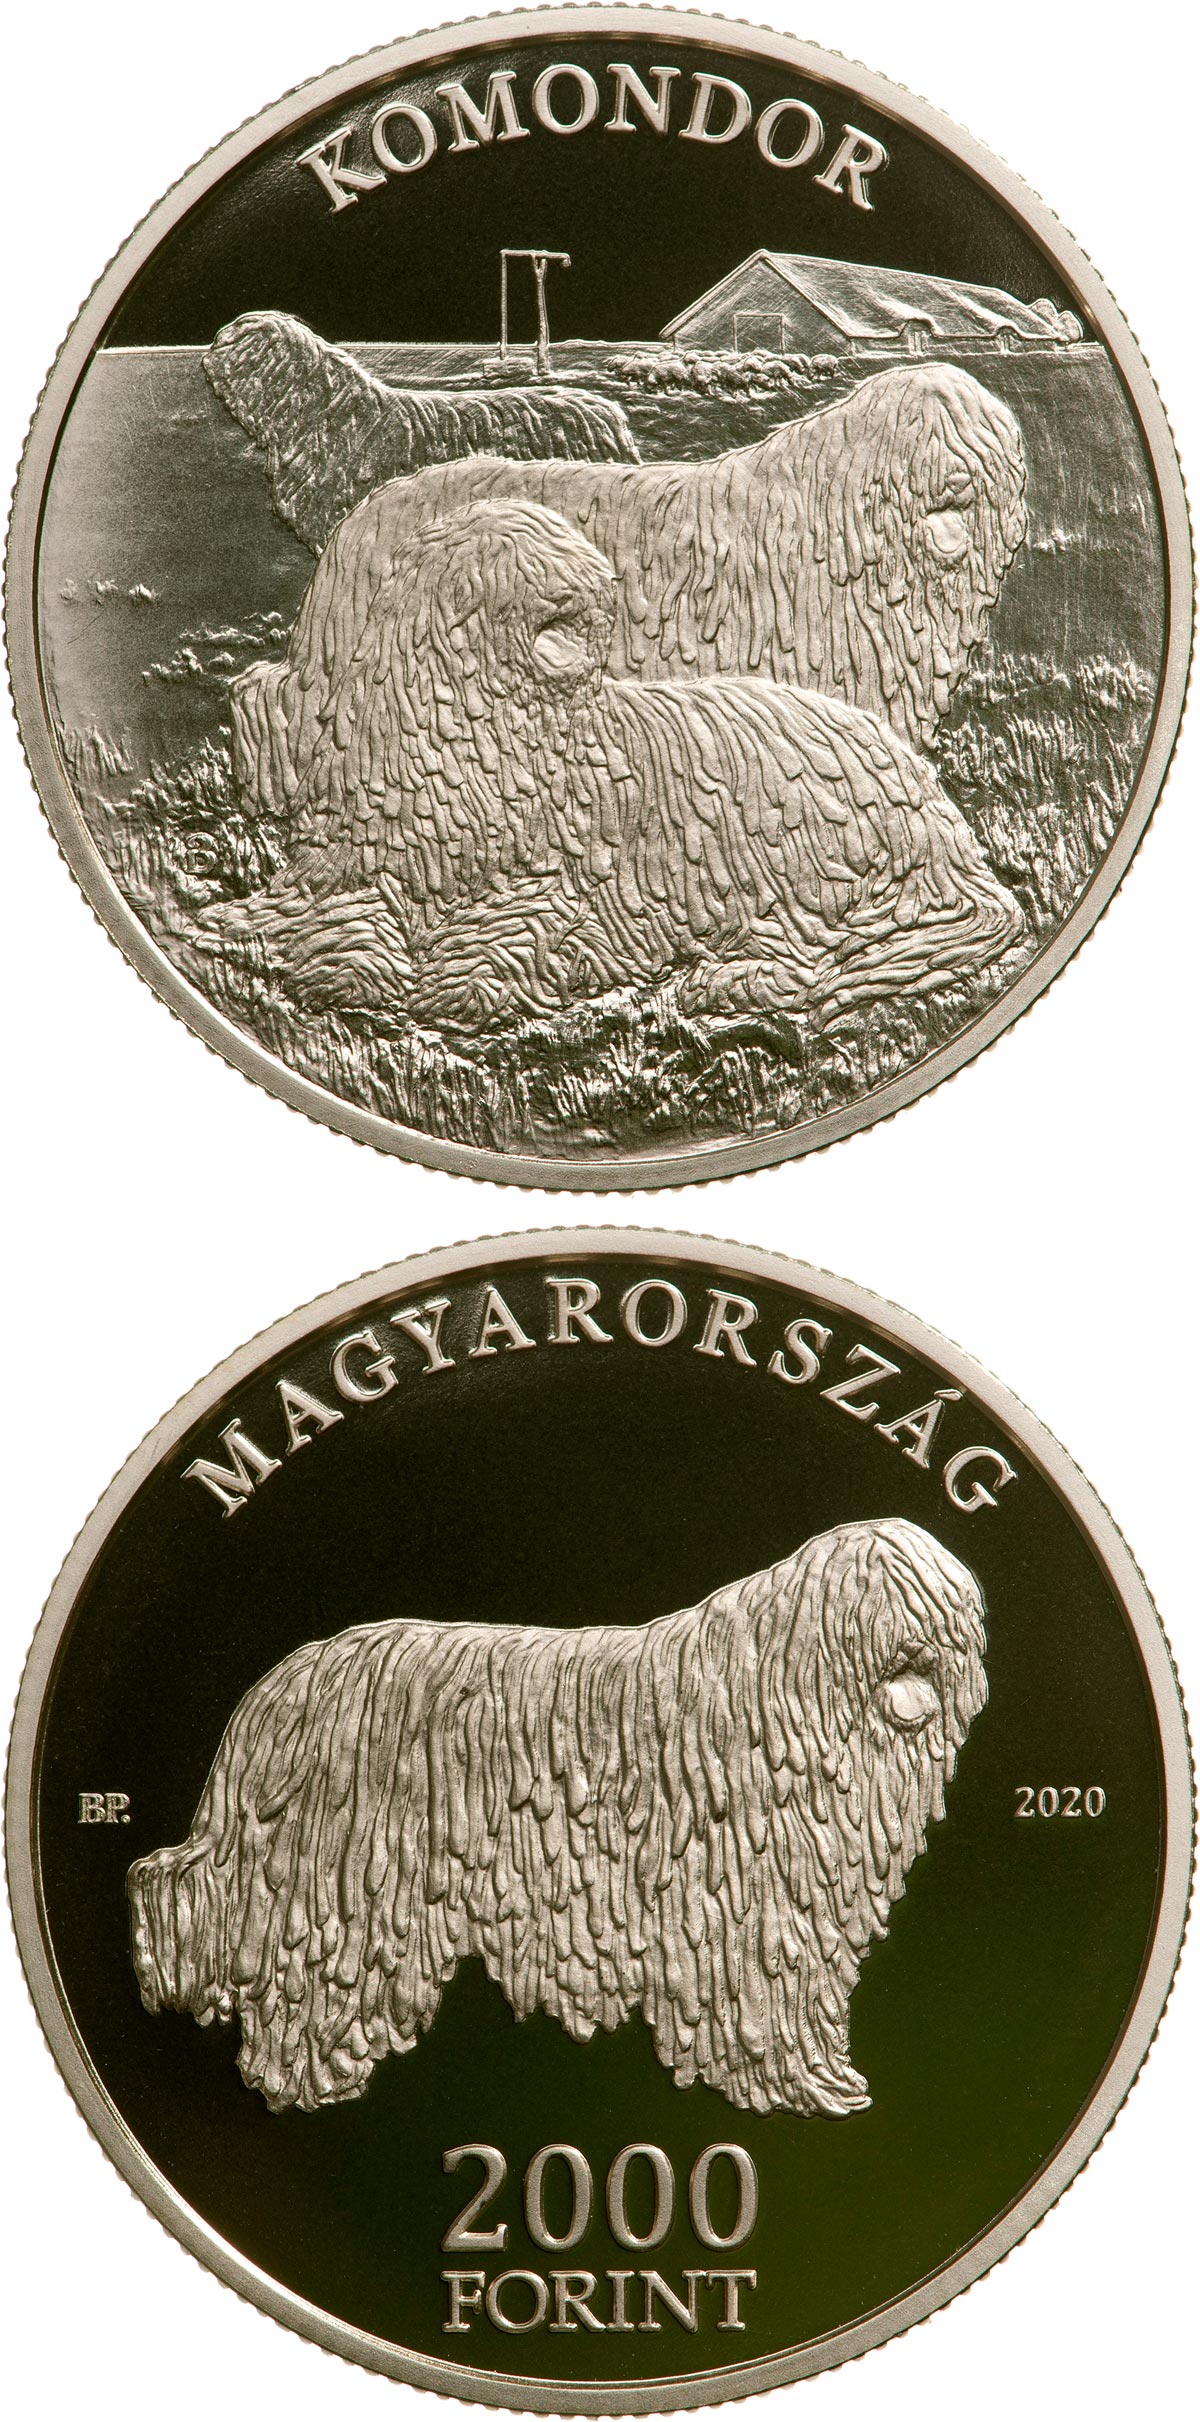 Image of 2000 forint coin - The Komondor | Hungary 2020.  The Brass coin is of proof-like quality.